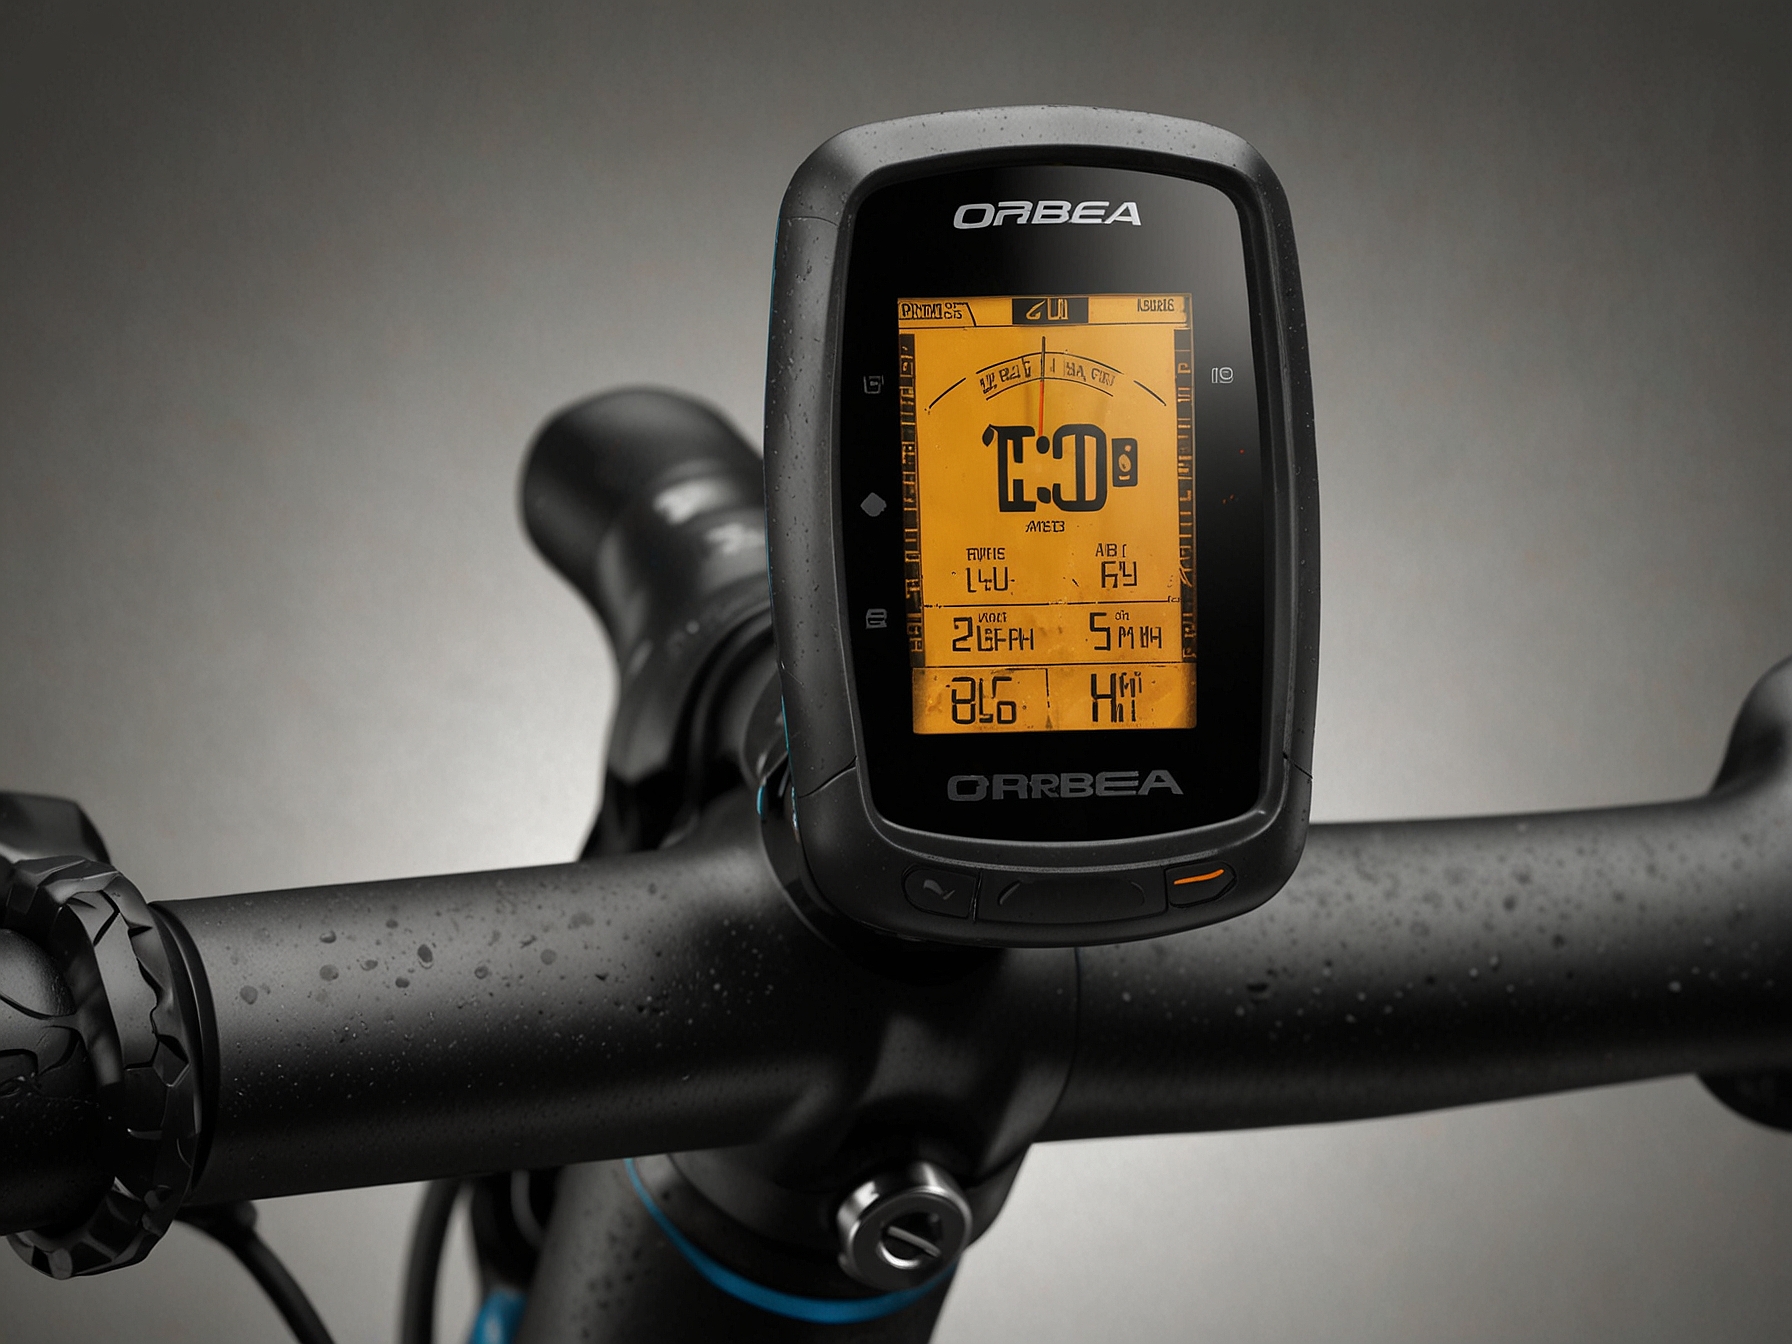 Close-up of the Orbea Diem 30's control panel and handlebar interface. The image highlights the intuitive display and switches for assist modes, emphasizing the bike's user-friendly design and technology.